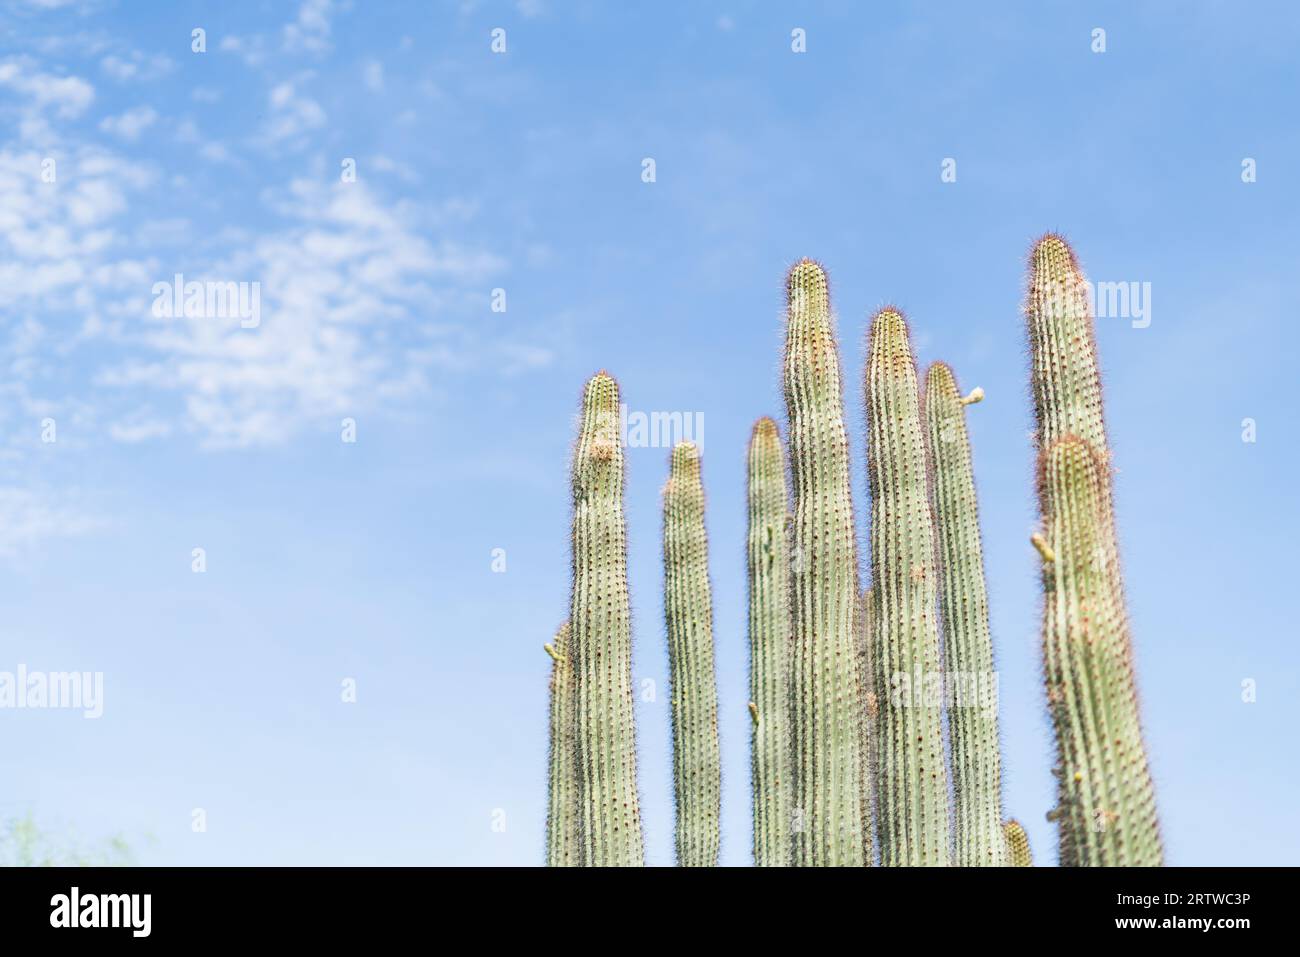 A gorup of green desert cacti against a bright southwest sky Stock Photo